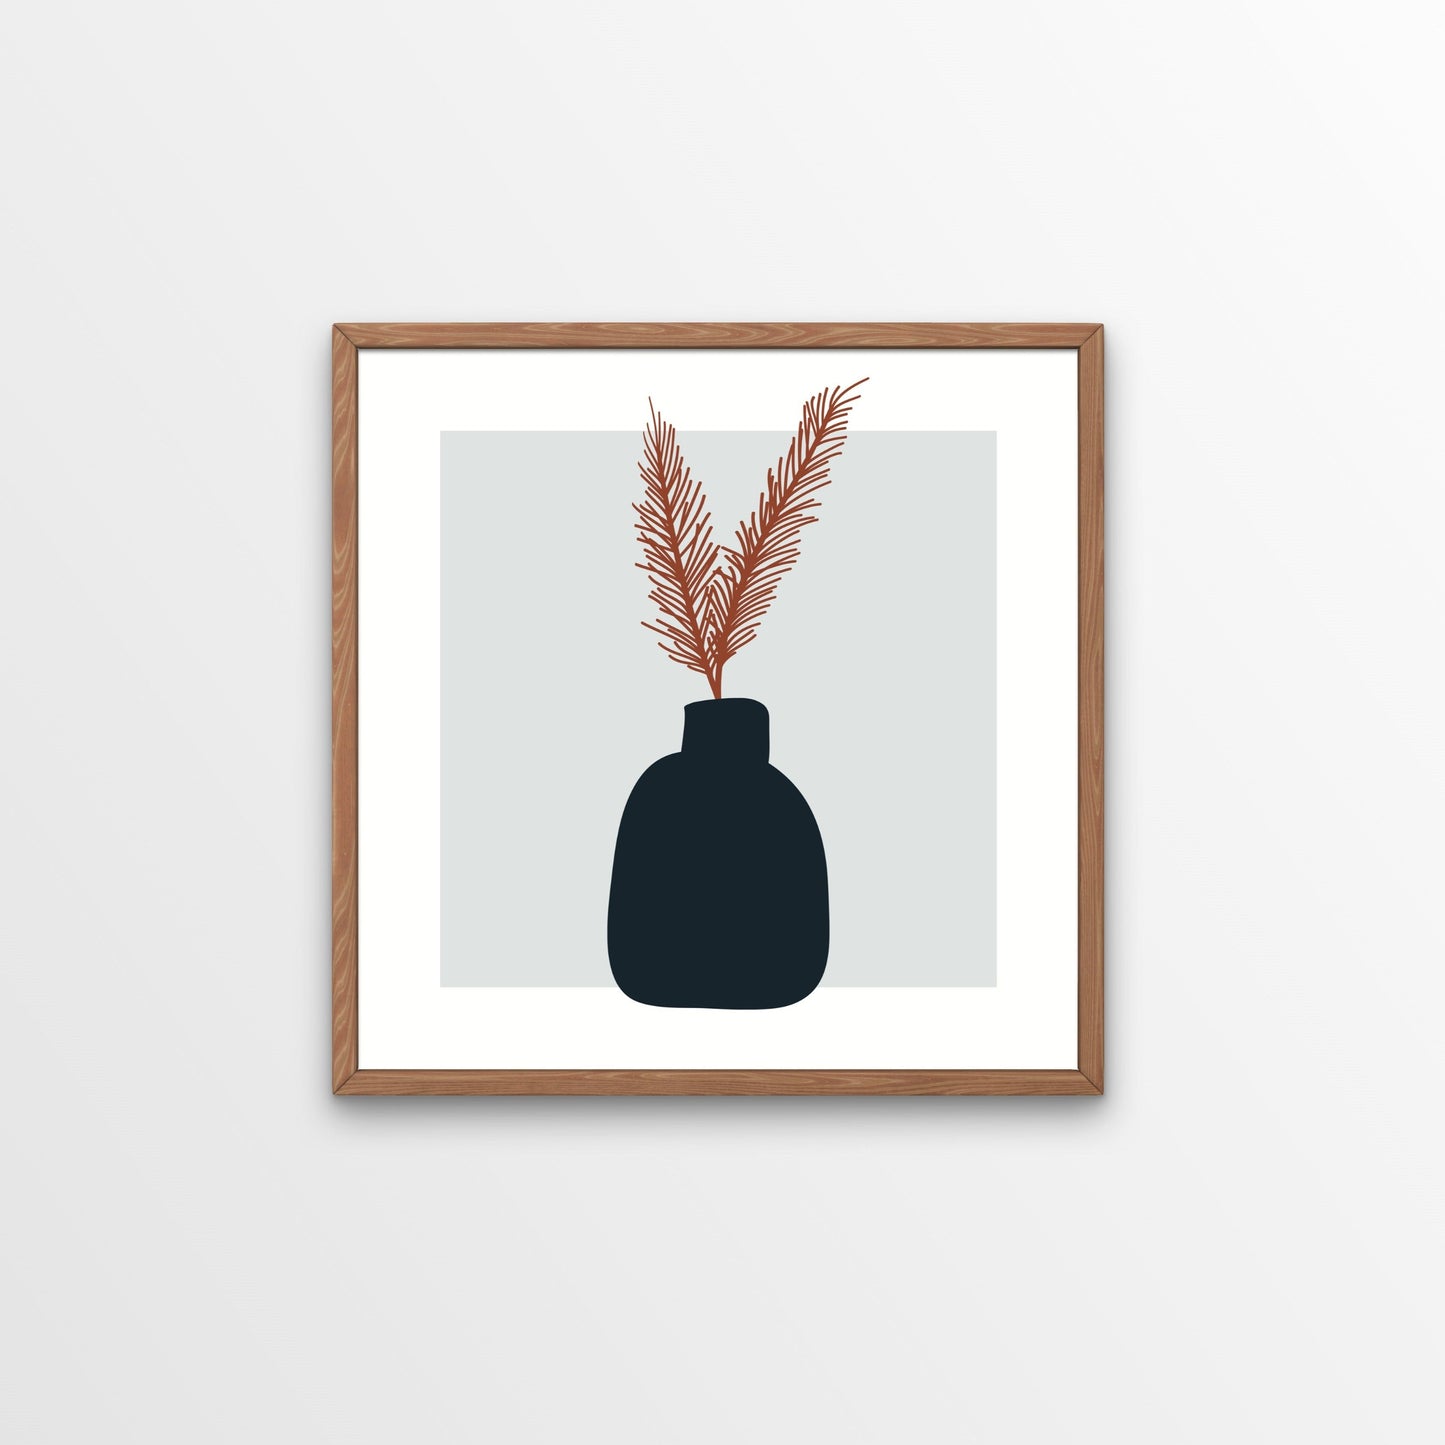 This pampas vase square art print is more than just a beautiful piece of art - it is a stunning representation of nature's simplistic beauty that will evoke a sense of peace and serenity in any space. 